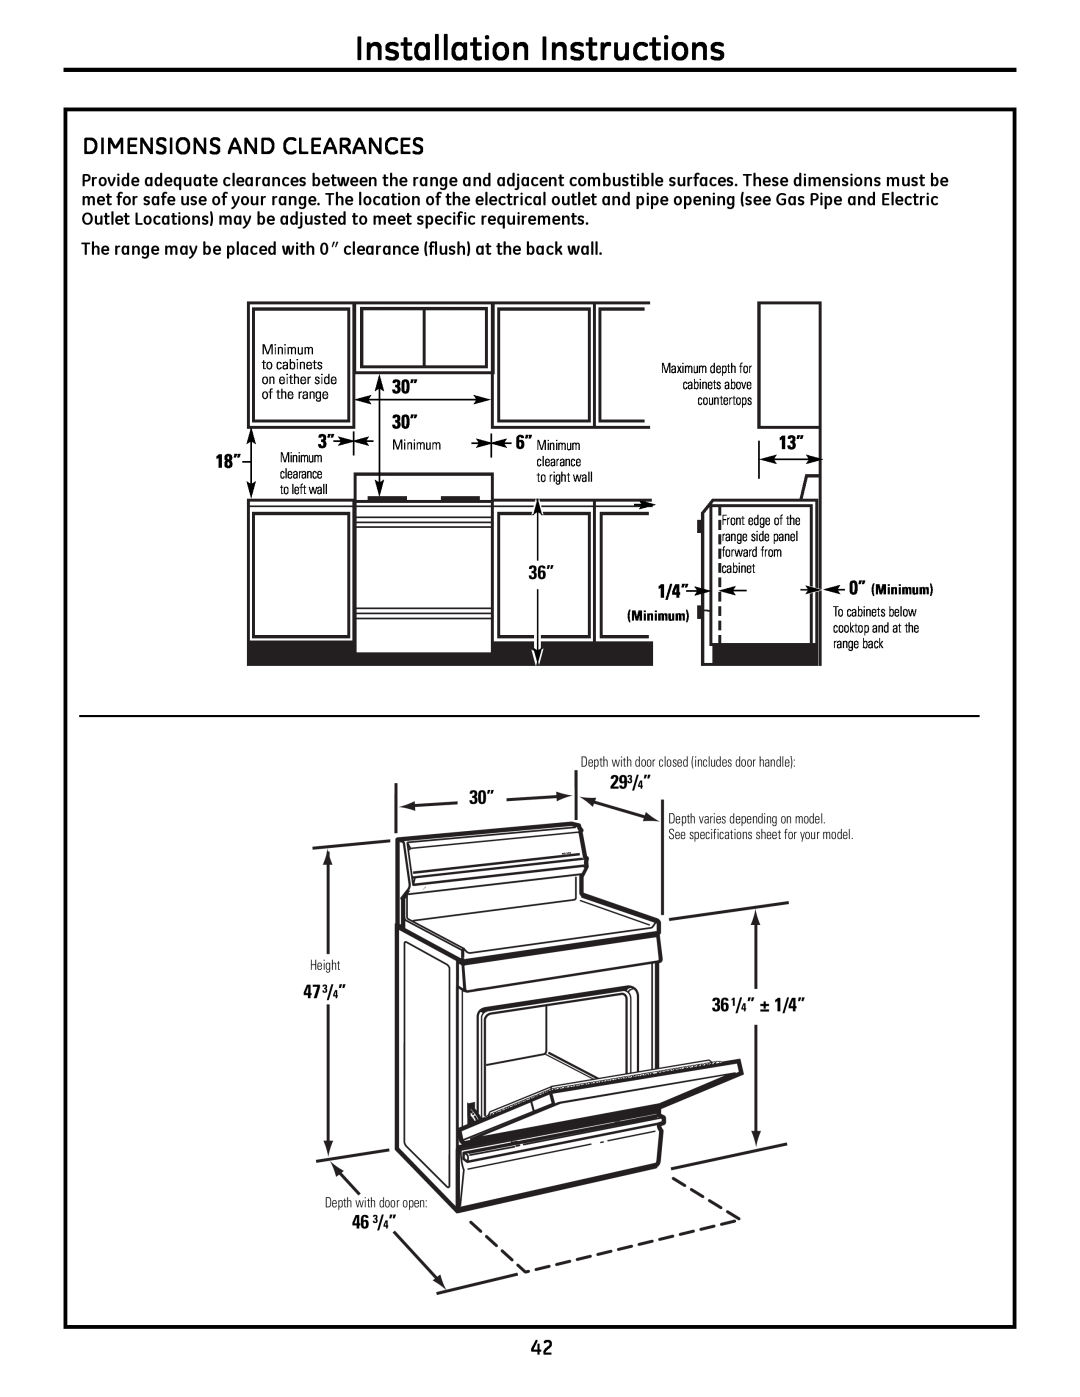 GE JGB295SERSS DImeNSIoNS aND CleaRaNCeS, Installation Instructions, 293/4” 30”, 473/4” 361/4” ± 1/4”, 46 3/4” 